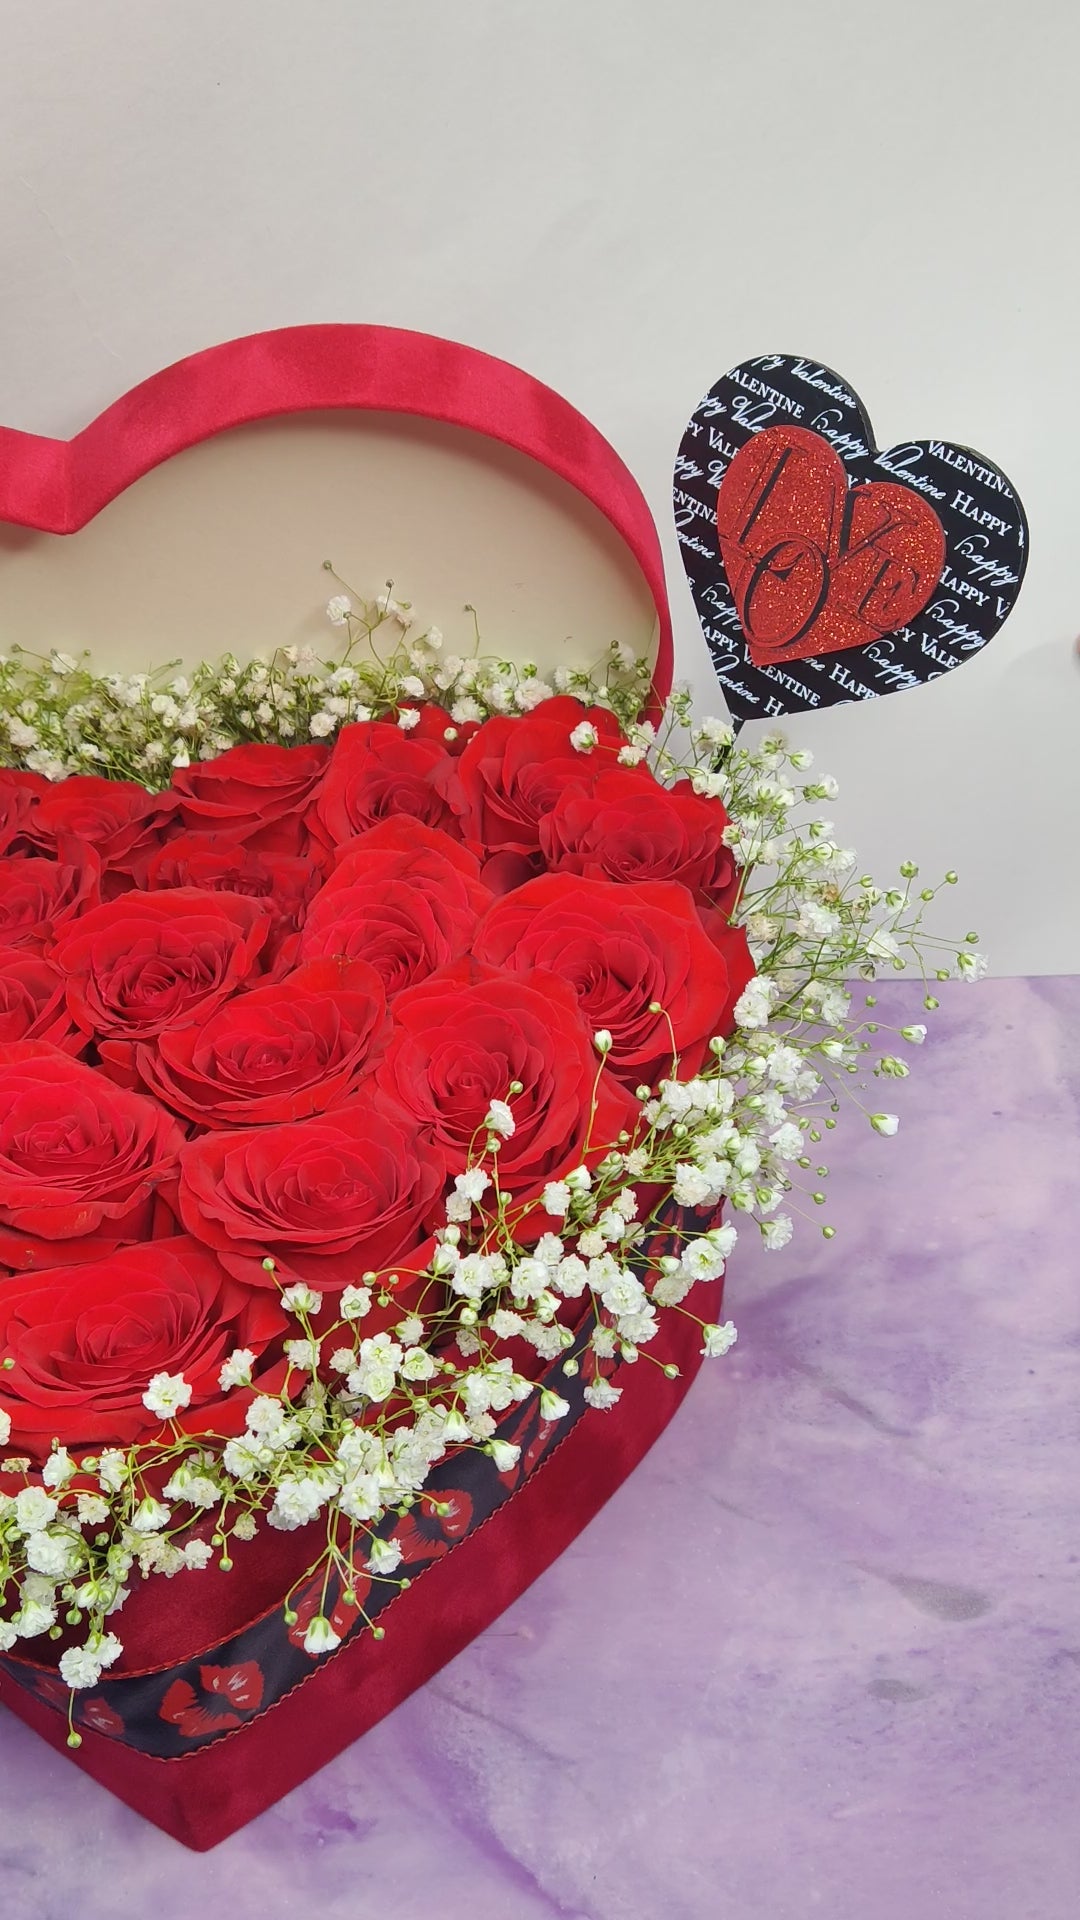 "With my whole HEART" - Red Roses + Velvet Heart Box